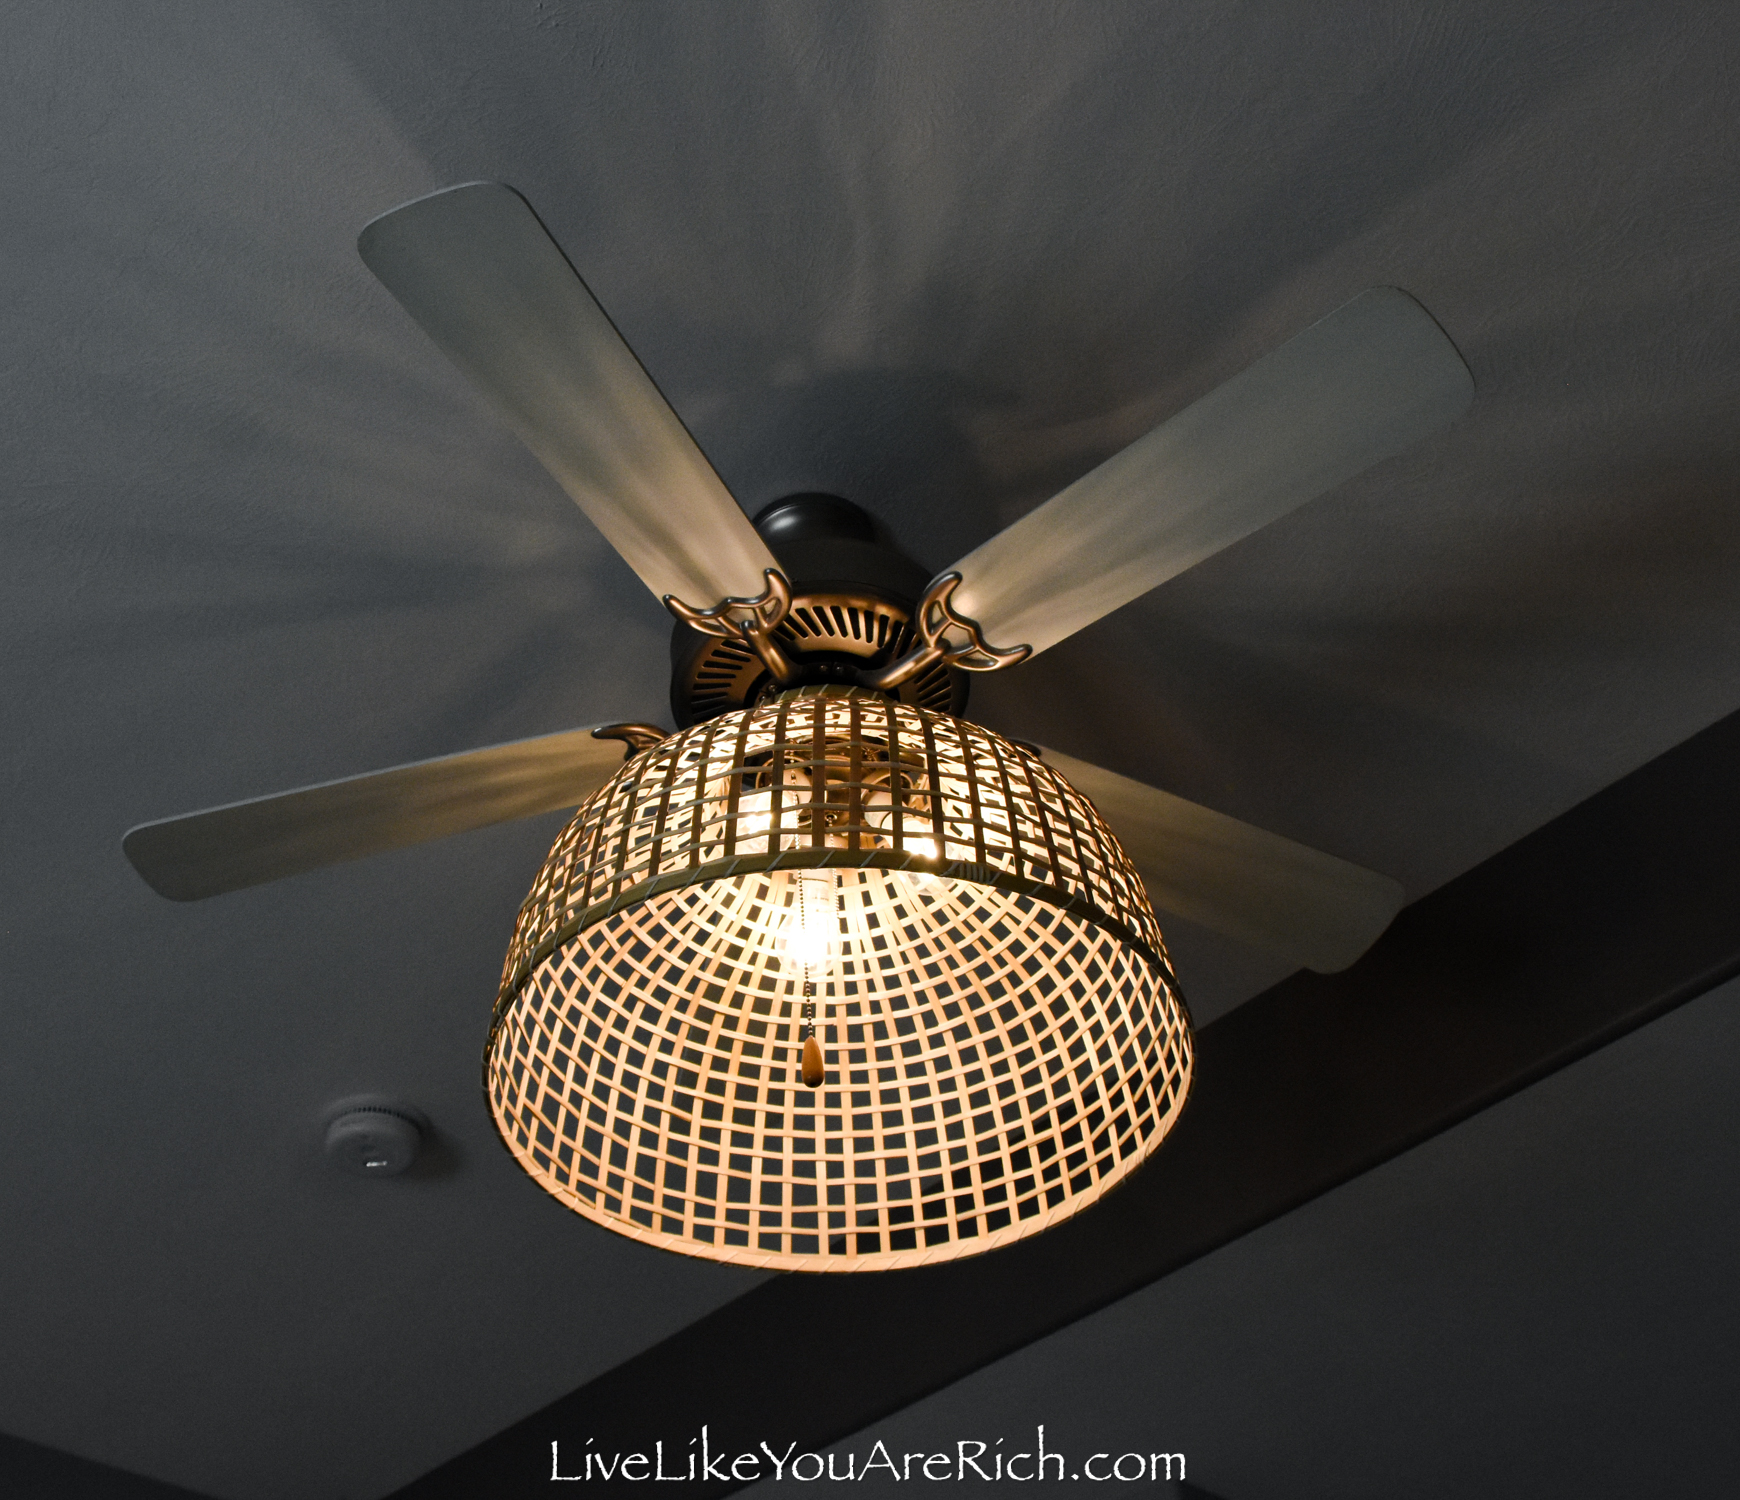 How to Upgrade an Old Ceiling Fan